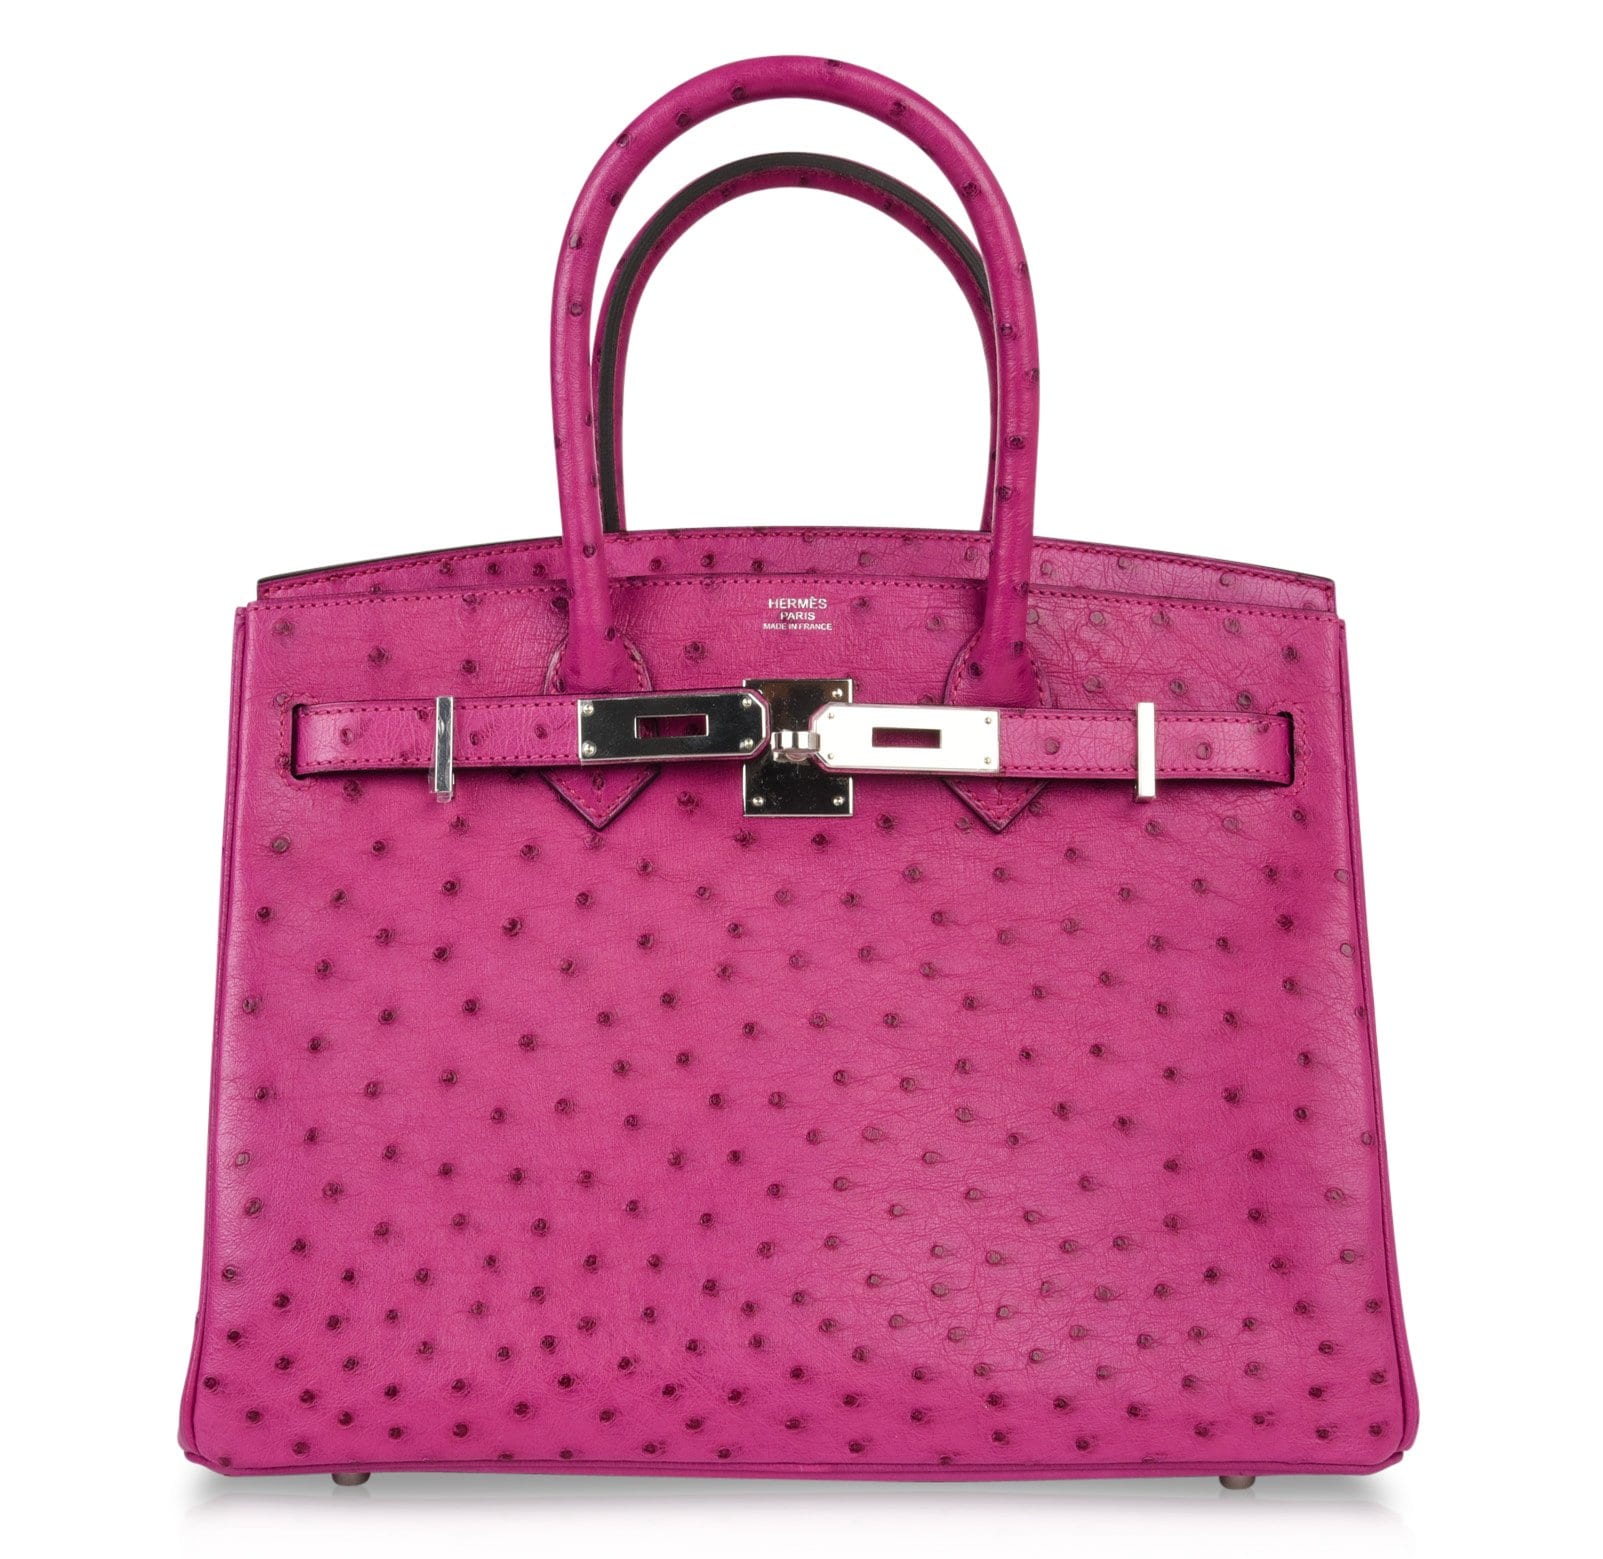 BRAND NEW ! Hermes Kelly 25cm Rose Pourpre Ostrich Leather